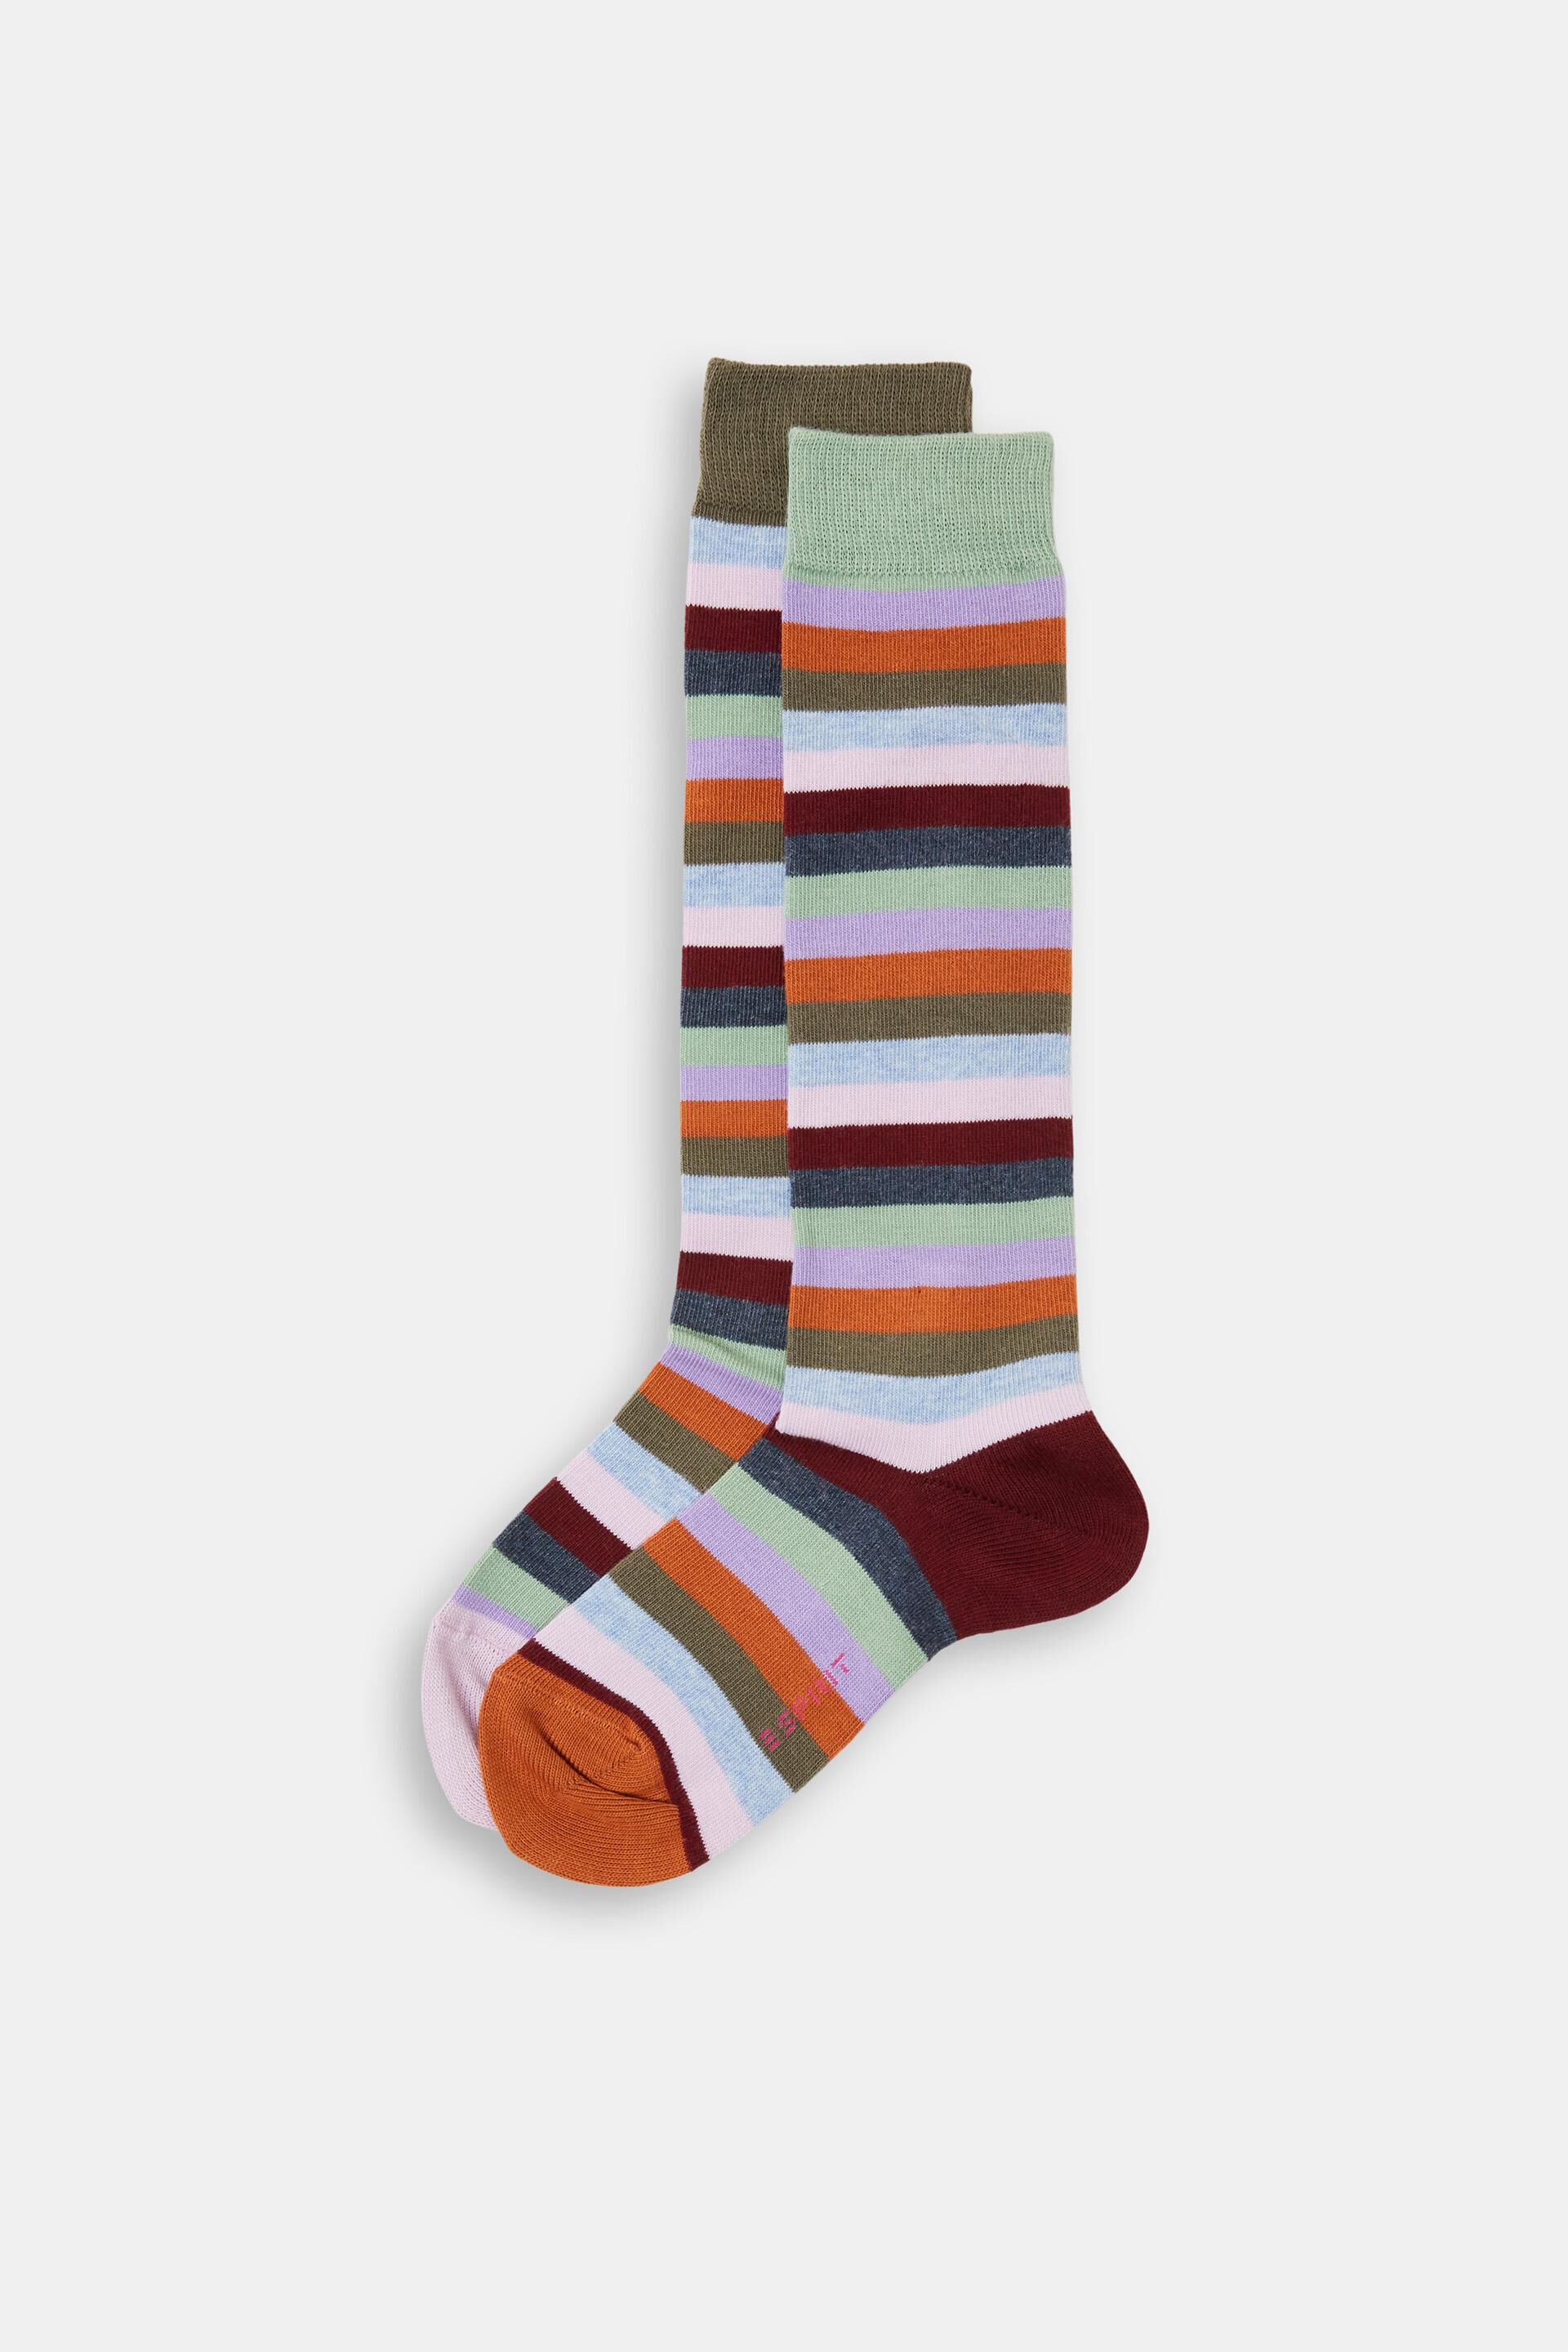 Esprit organic cotton pack of socks, knee-high Double